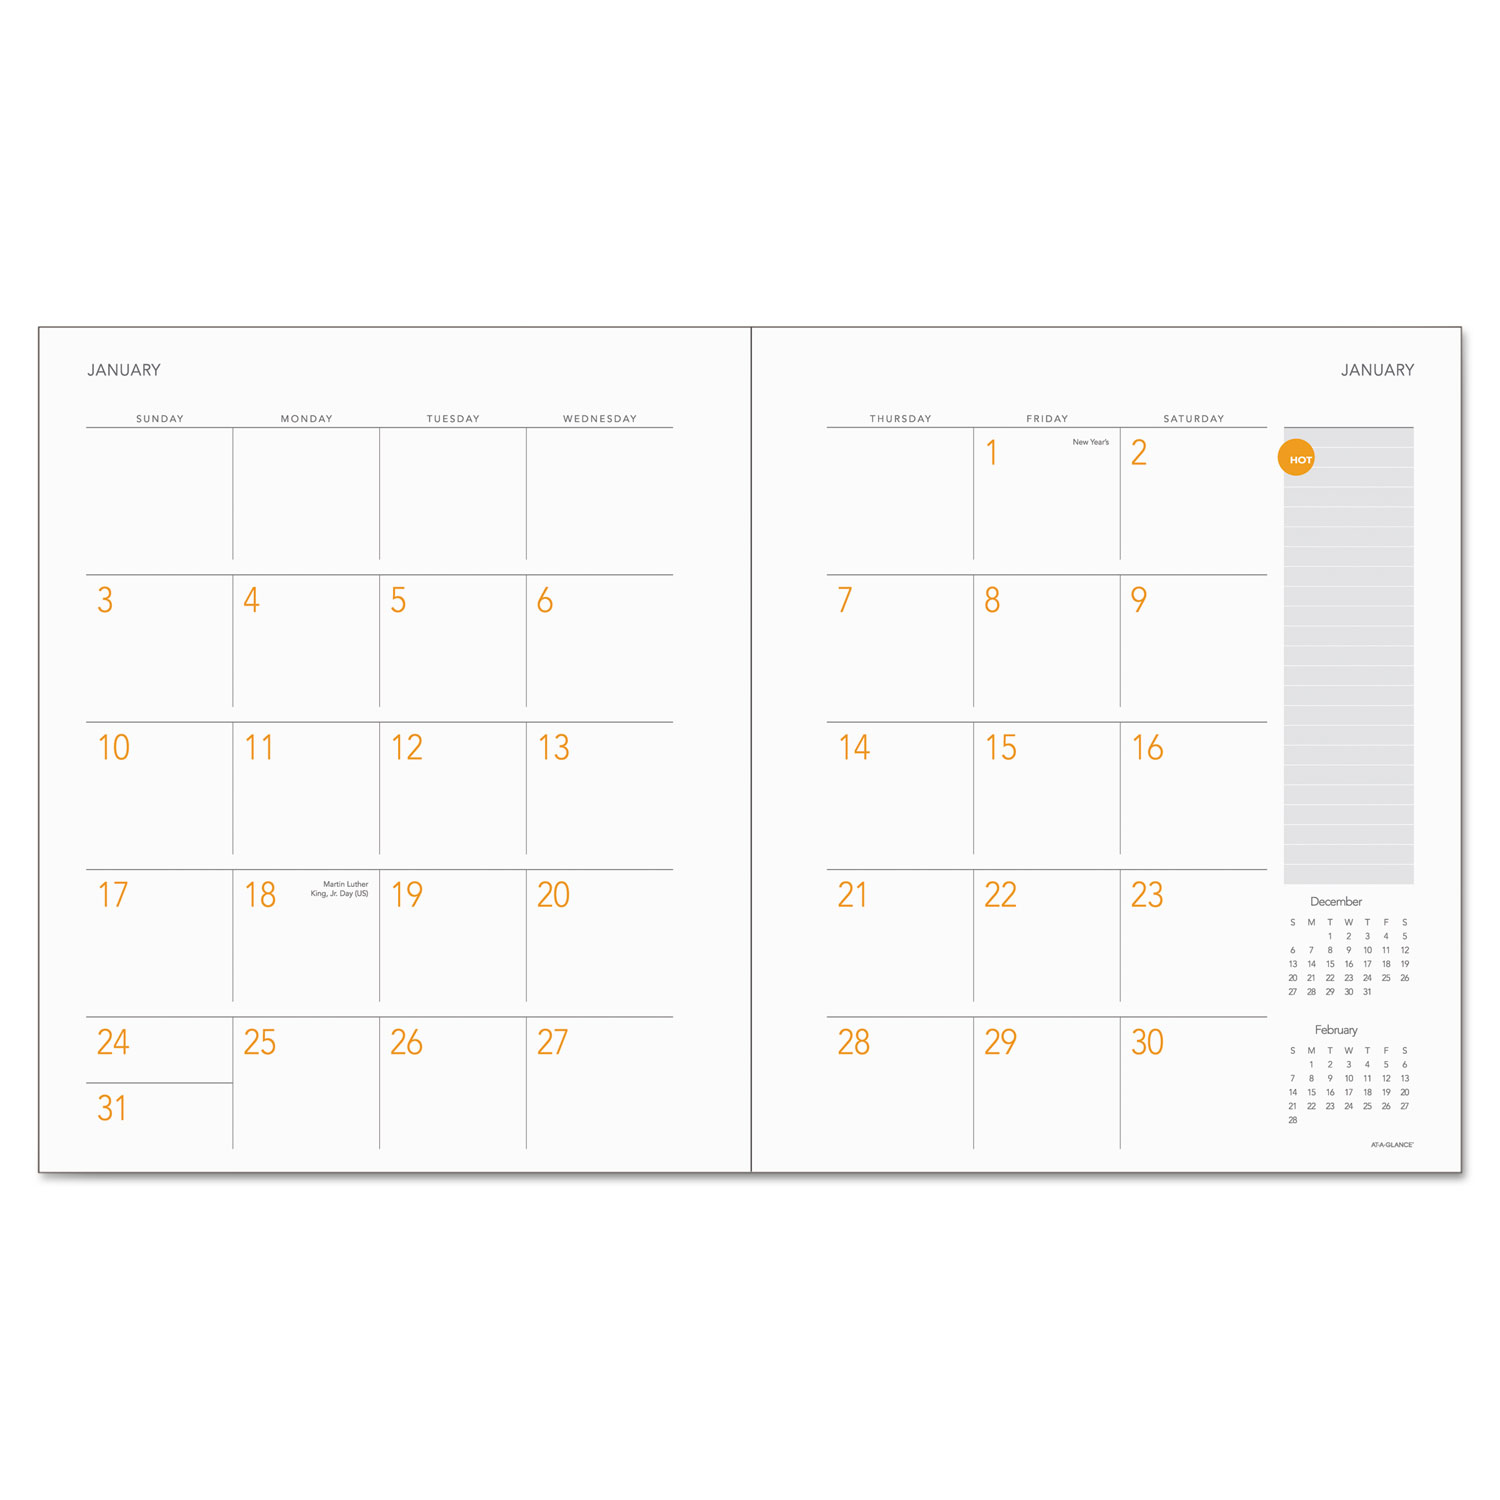 Plan. Write. Remember. Academic Monthly Planner, 9 1/8 x 10 15/16, WE, 2018-2019